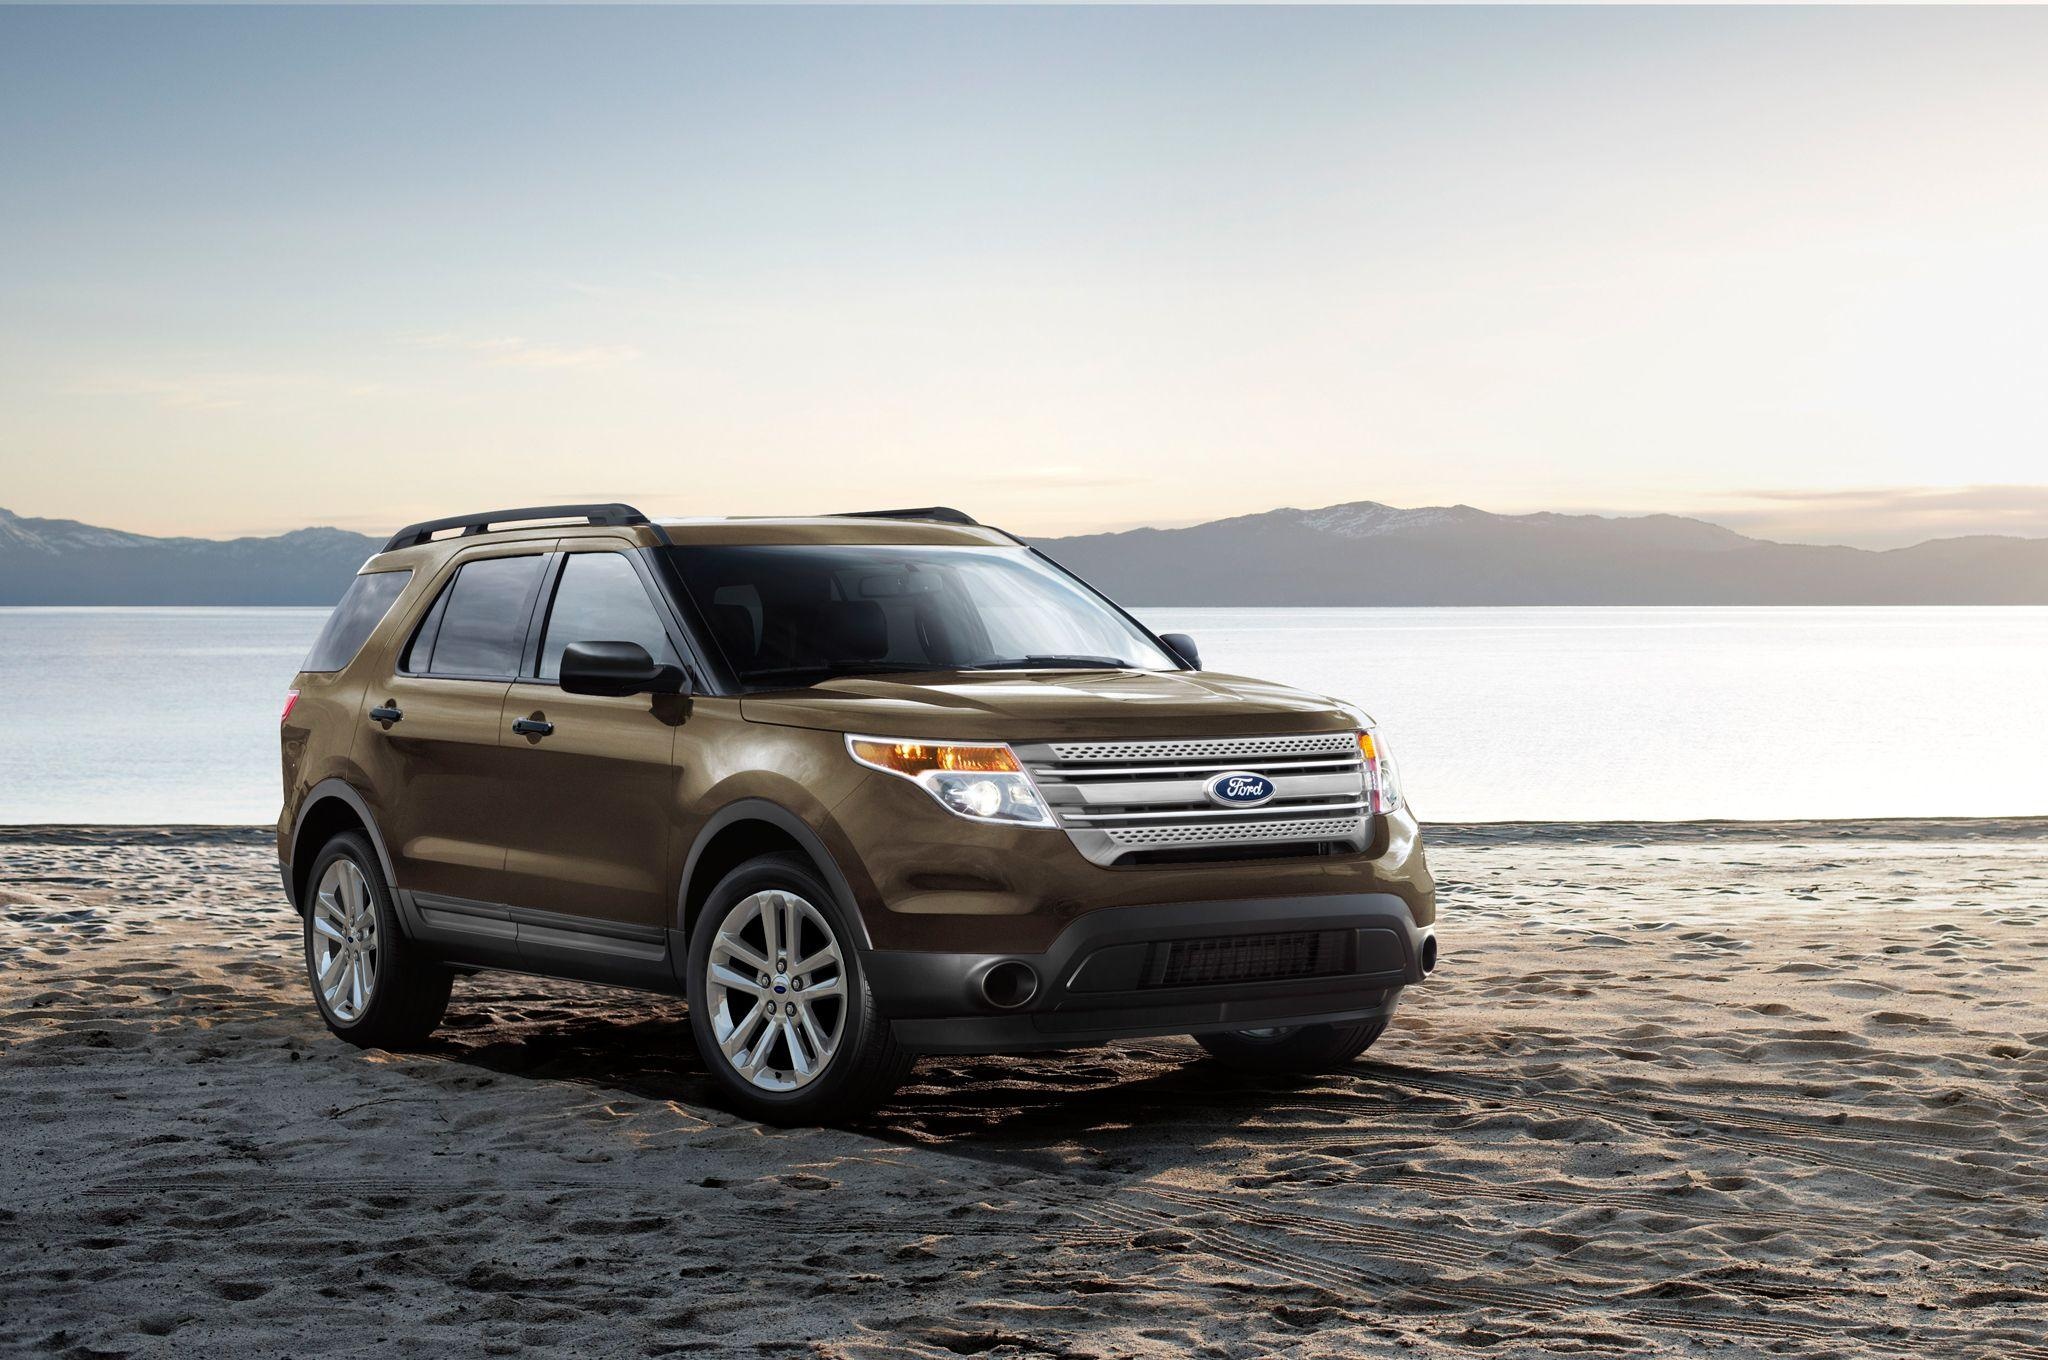 Ford Explorer, Powerful SUV, High-quality wallpapers, American cars, 2050x1360 HD Desktop